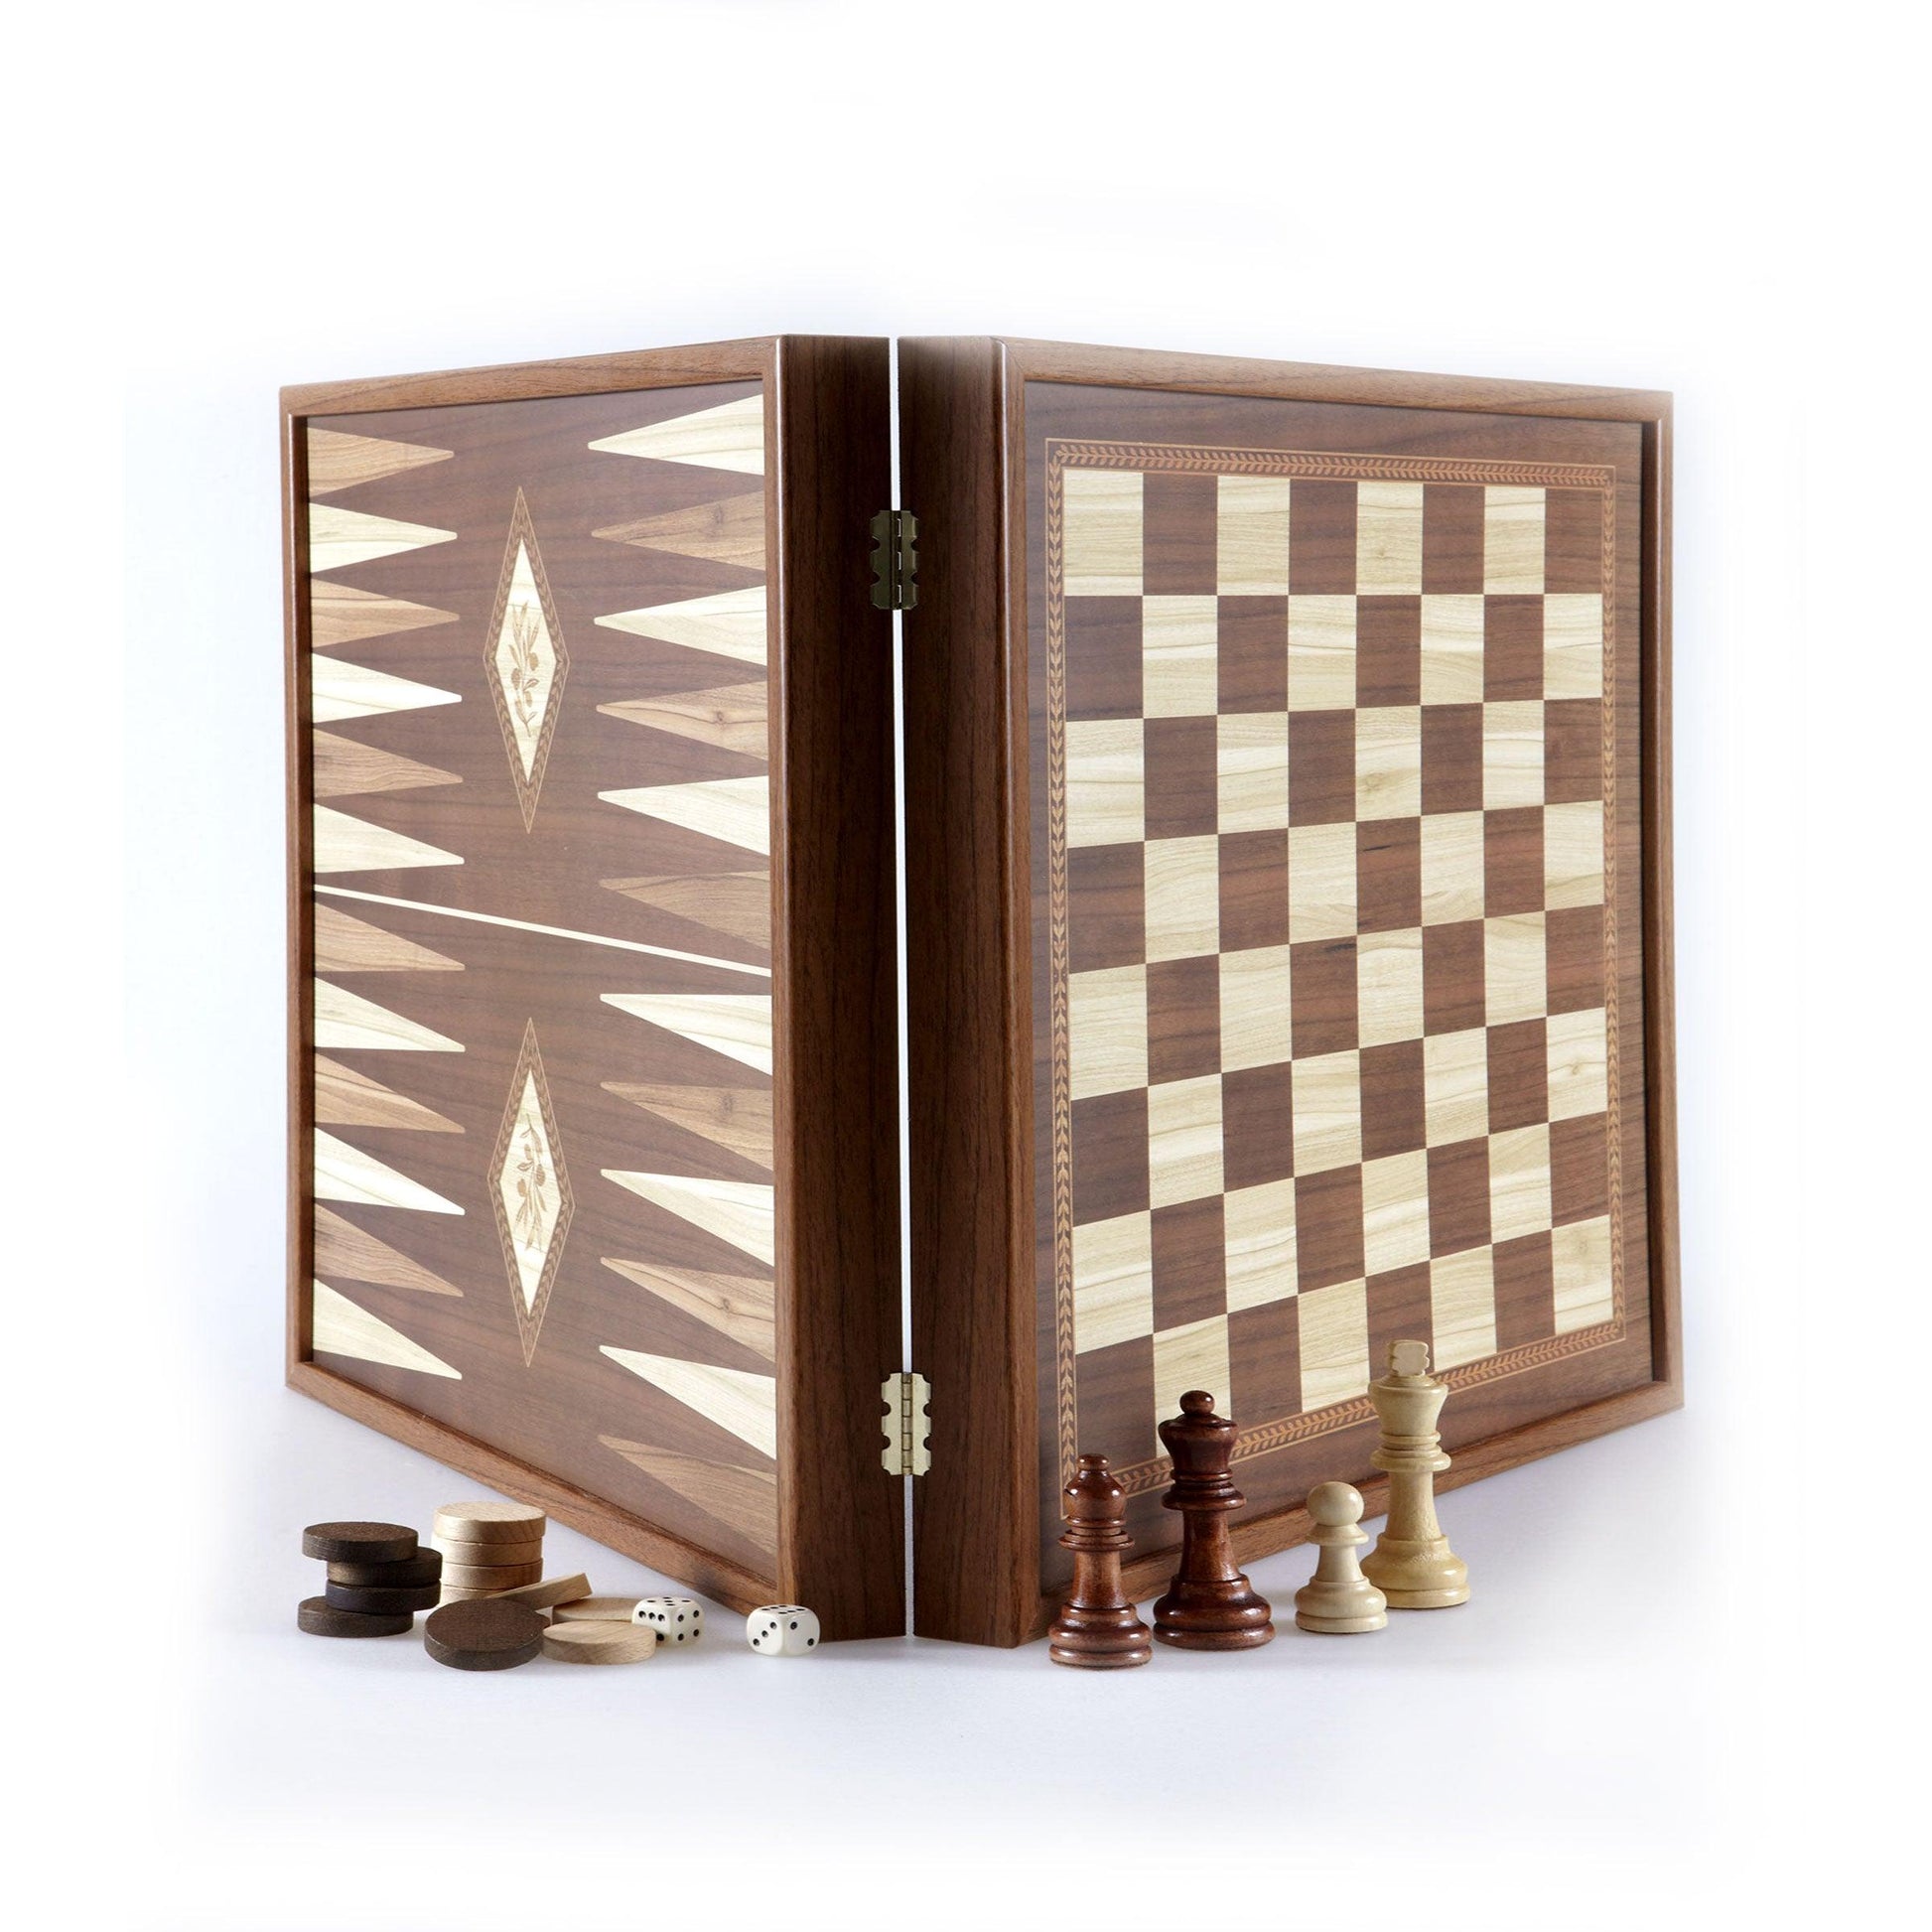 CLASSIC STYLE 2 in 1 Combo Game Chess/Backgammon Large - LAZADO